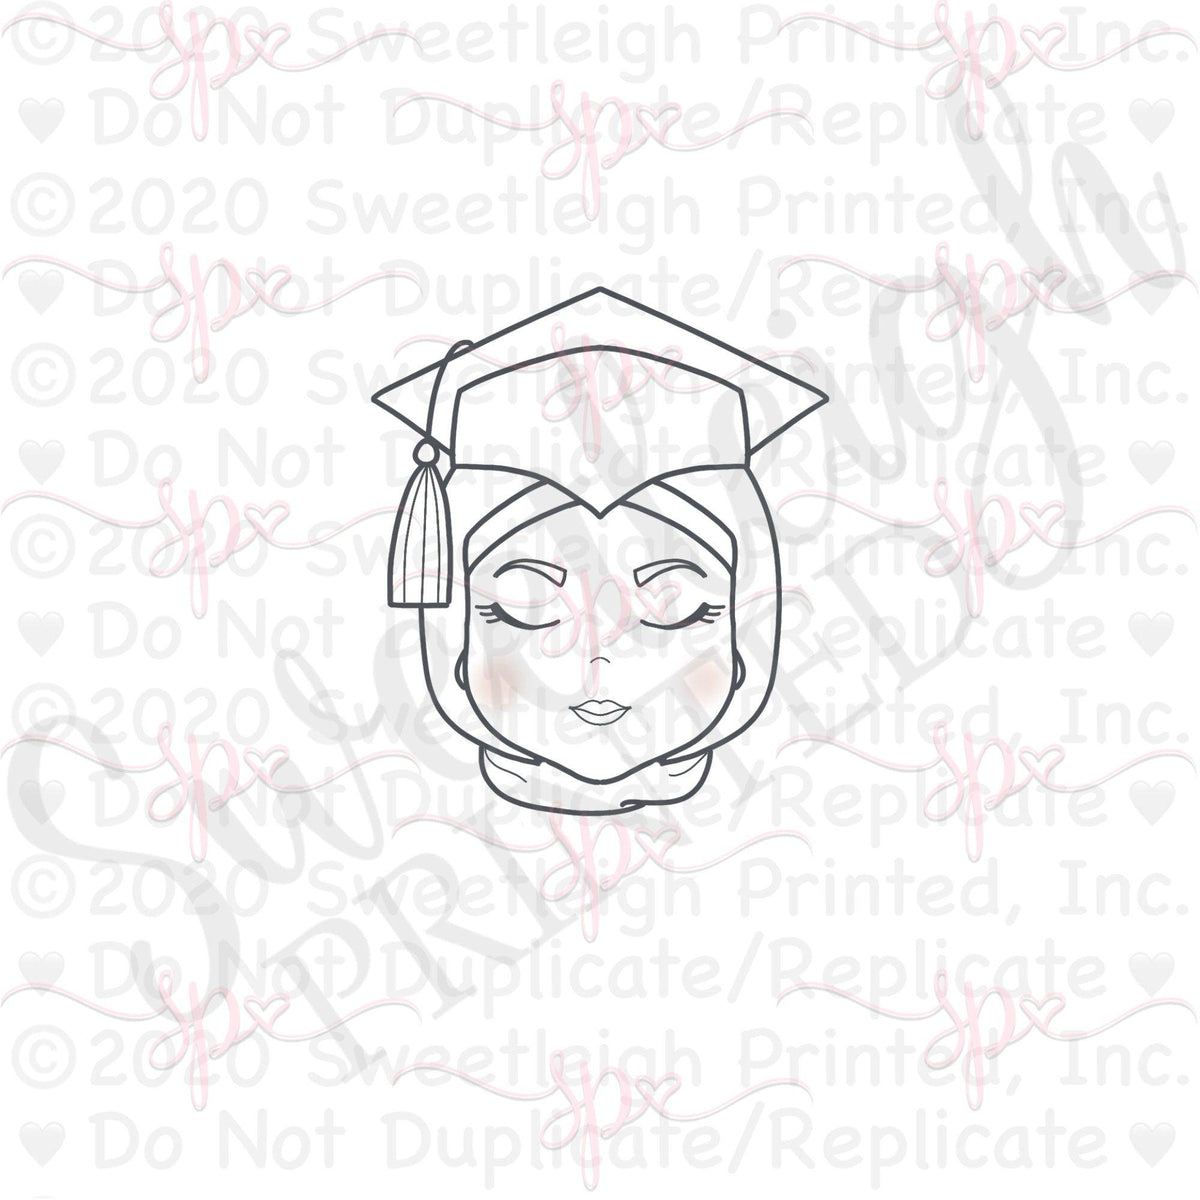 Grad Girl Face with Hijab Cookie Cutter - Sweetleigh 